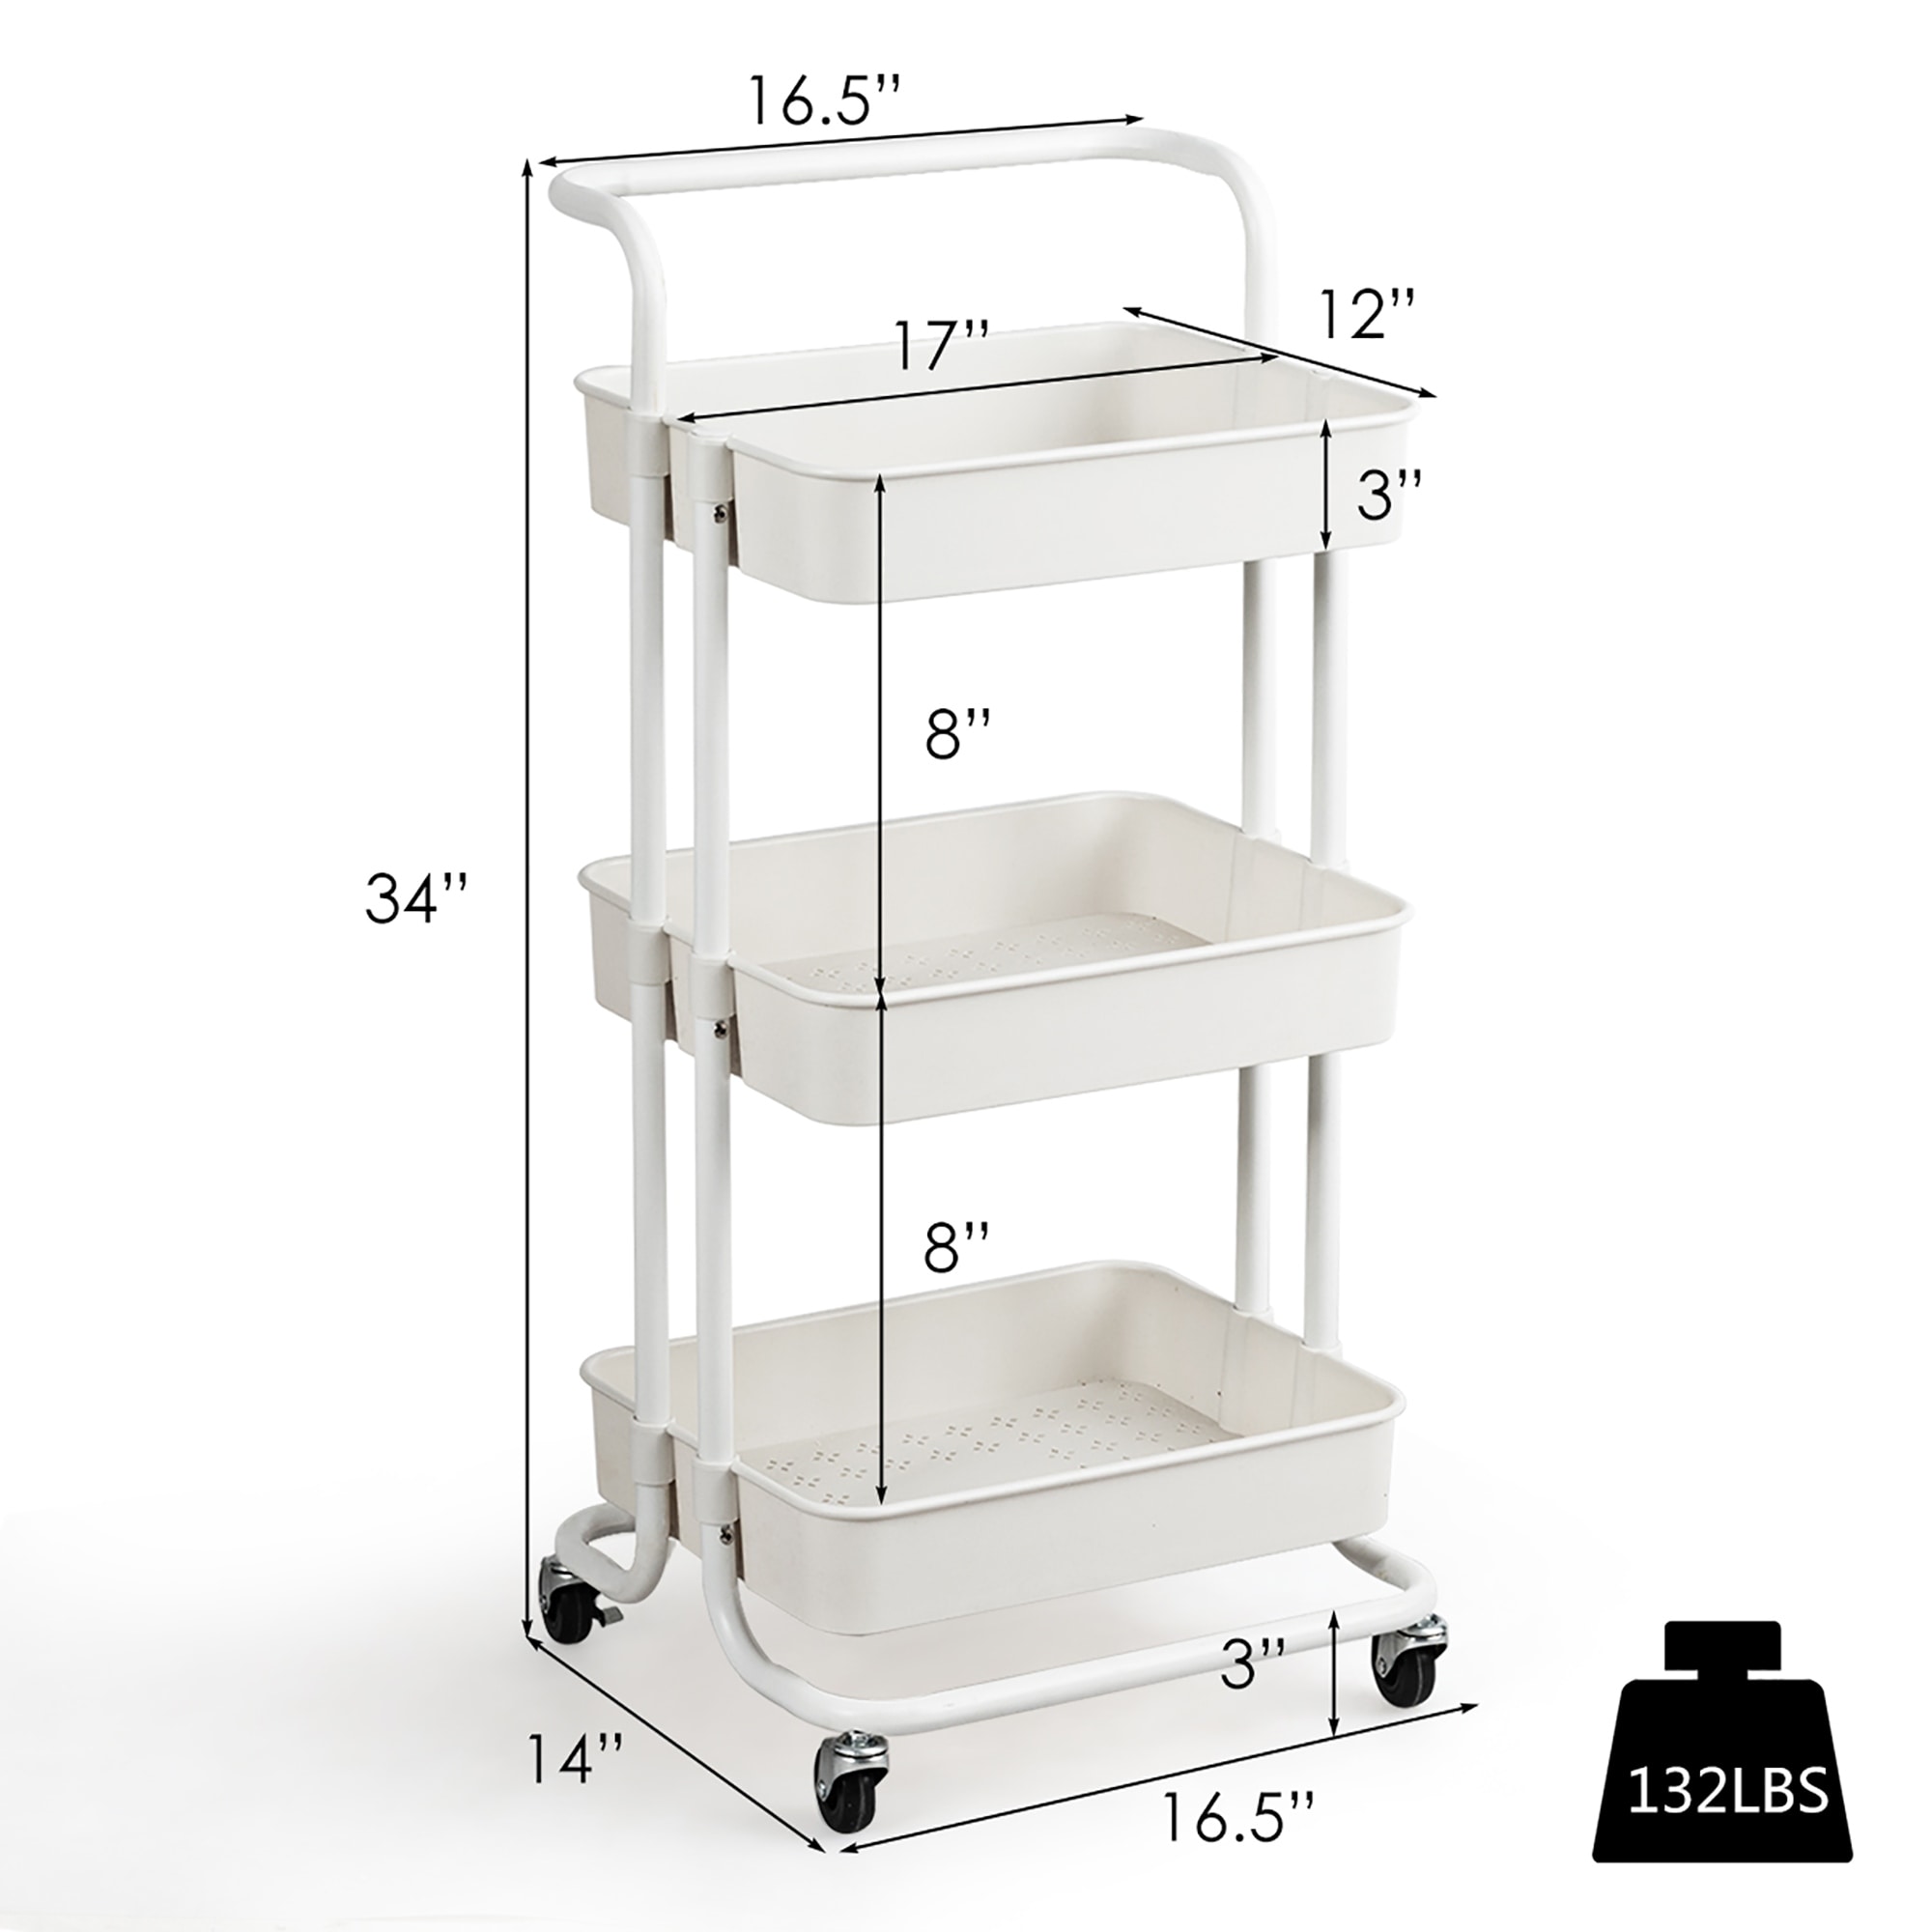 https://ak1.ostkcdn.com/images/products/is/images/direct/30332e397a68187ecb530a4fb5e2f7b800b898d2/3-Tier-Utility-Cart-Storage-Rolling-Cart-with-Casters.jpg